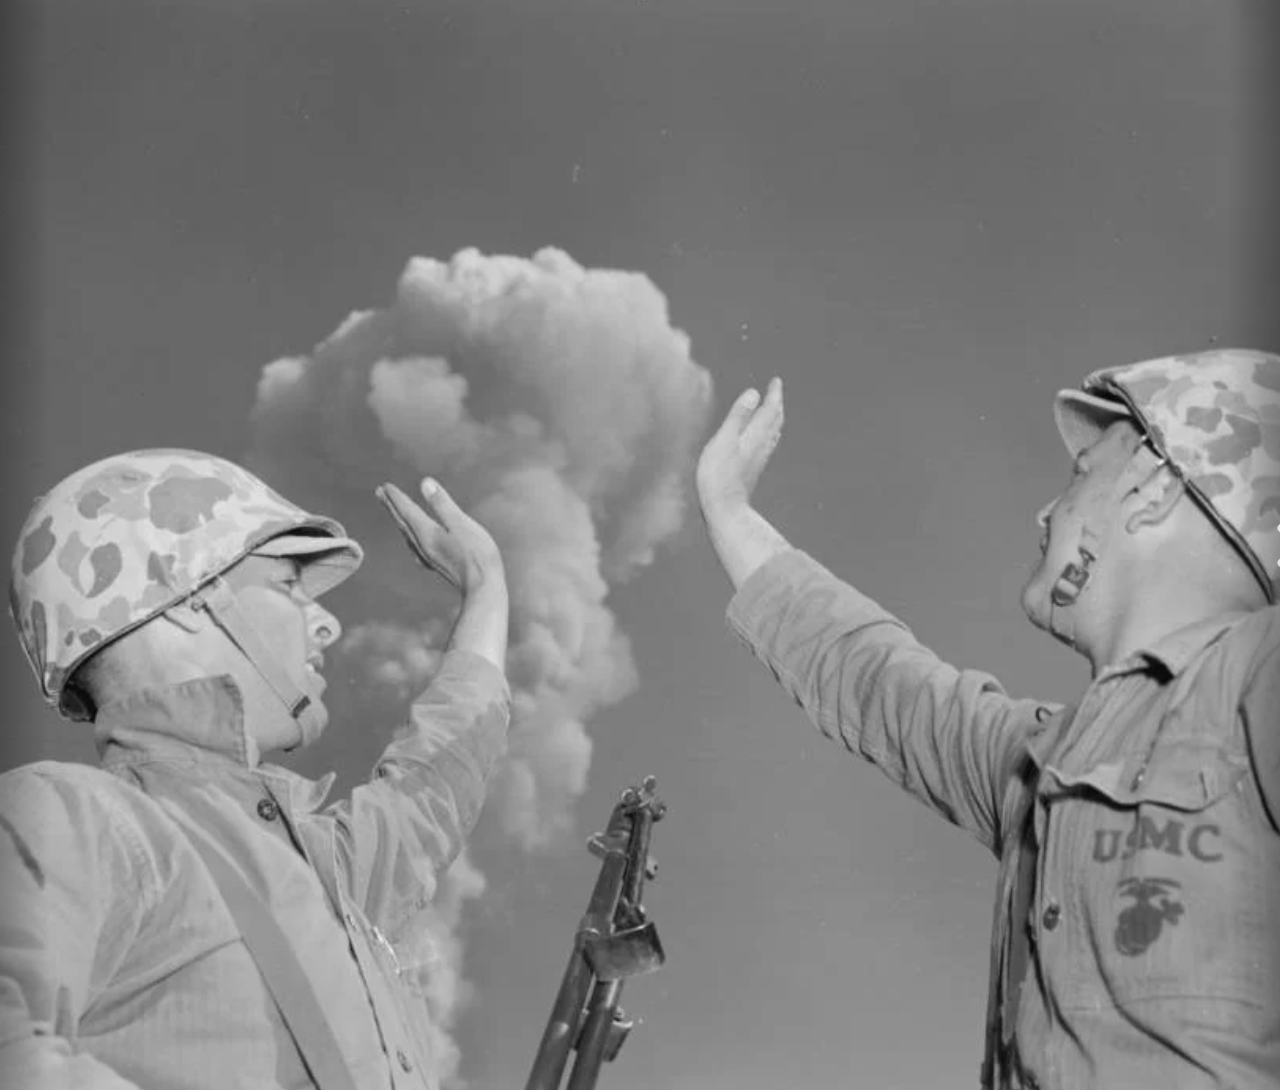 20 Photos of People Staring Blindly at Nuclear Explosions